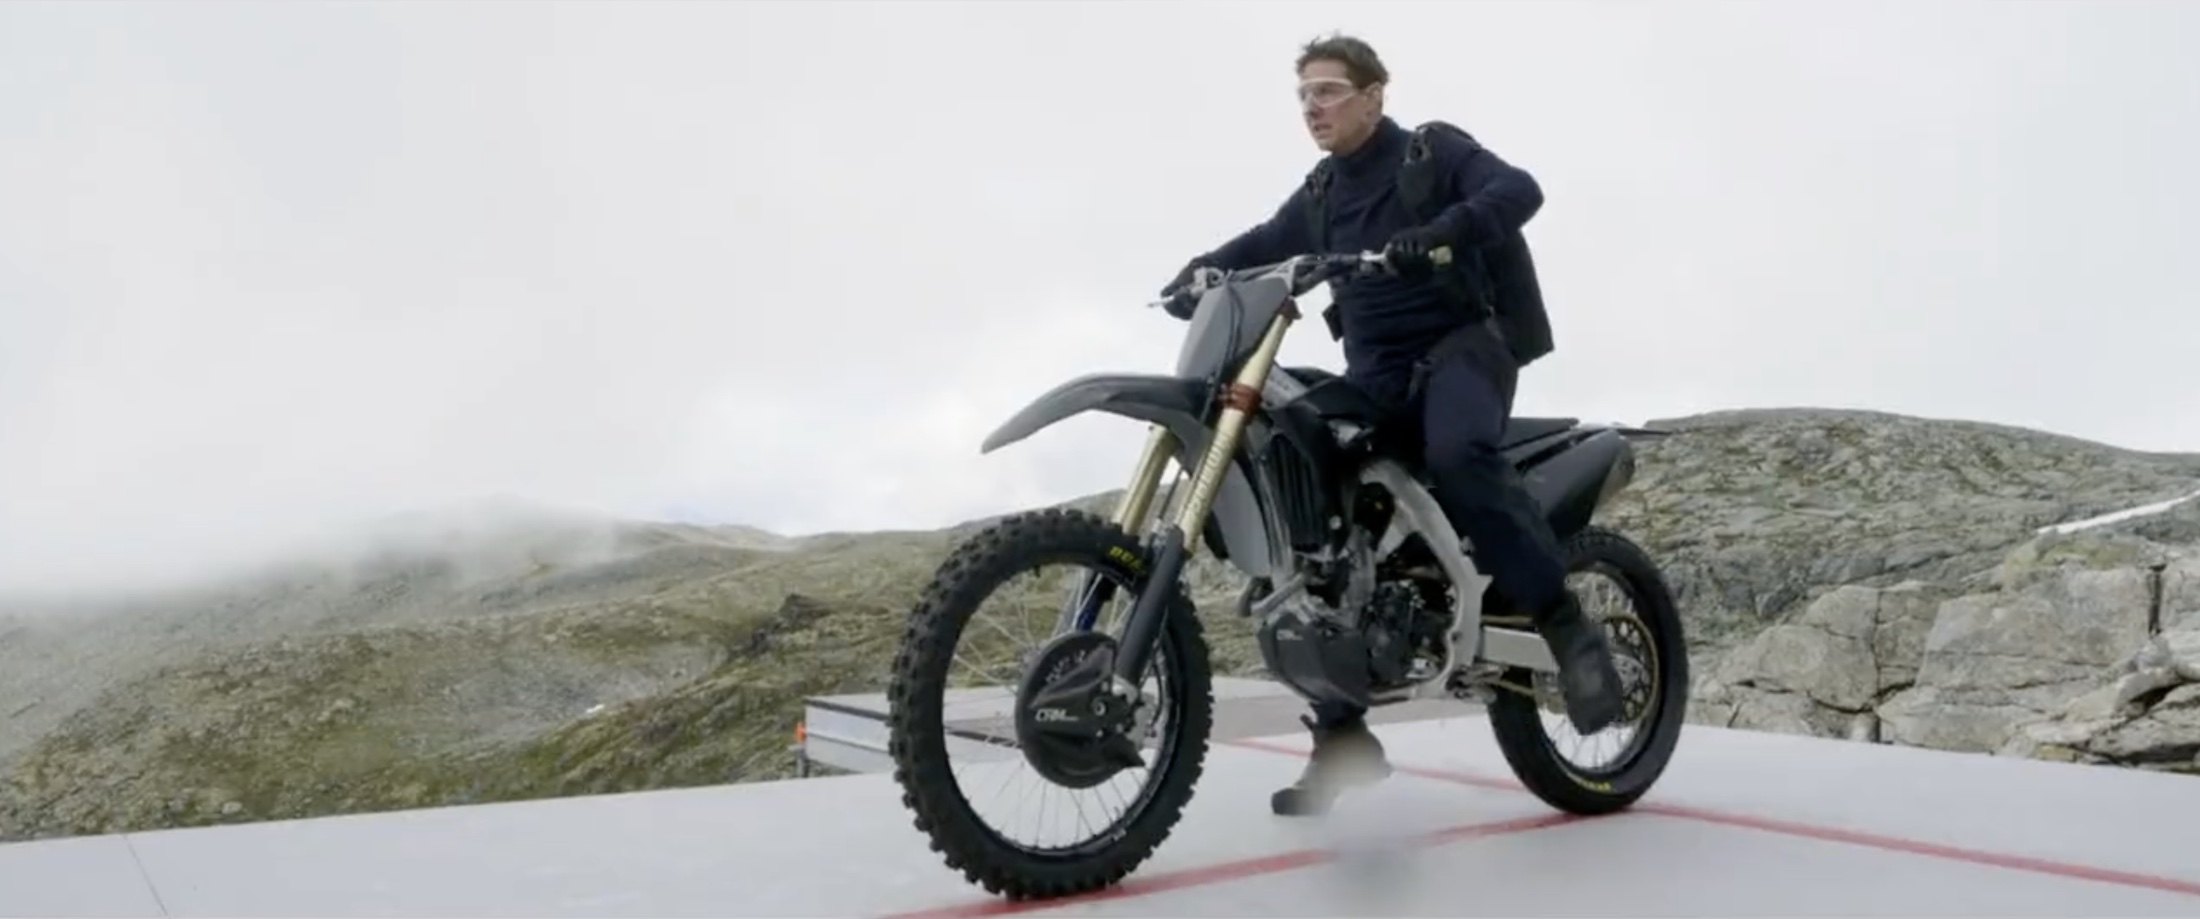 Superb: Watch Tom Cruise Experience Bike Off Cliff In Norway